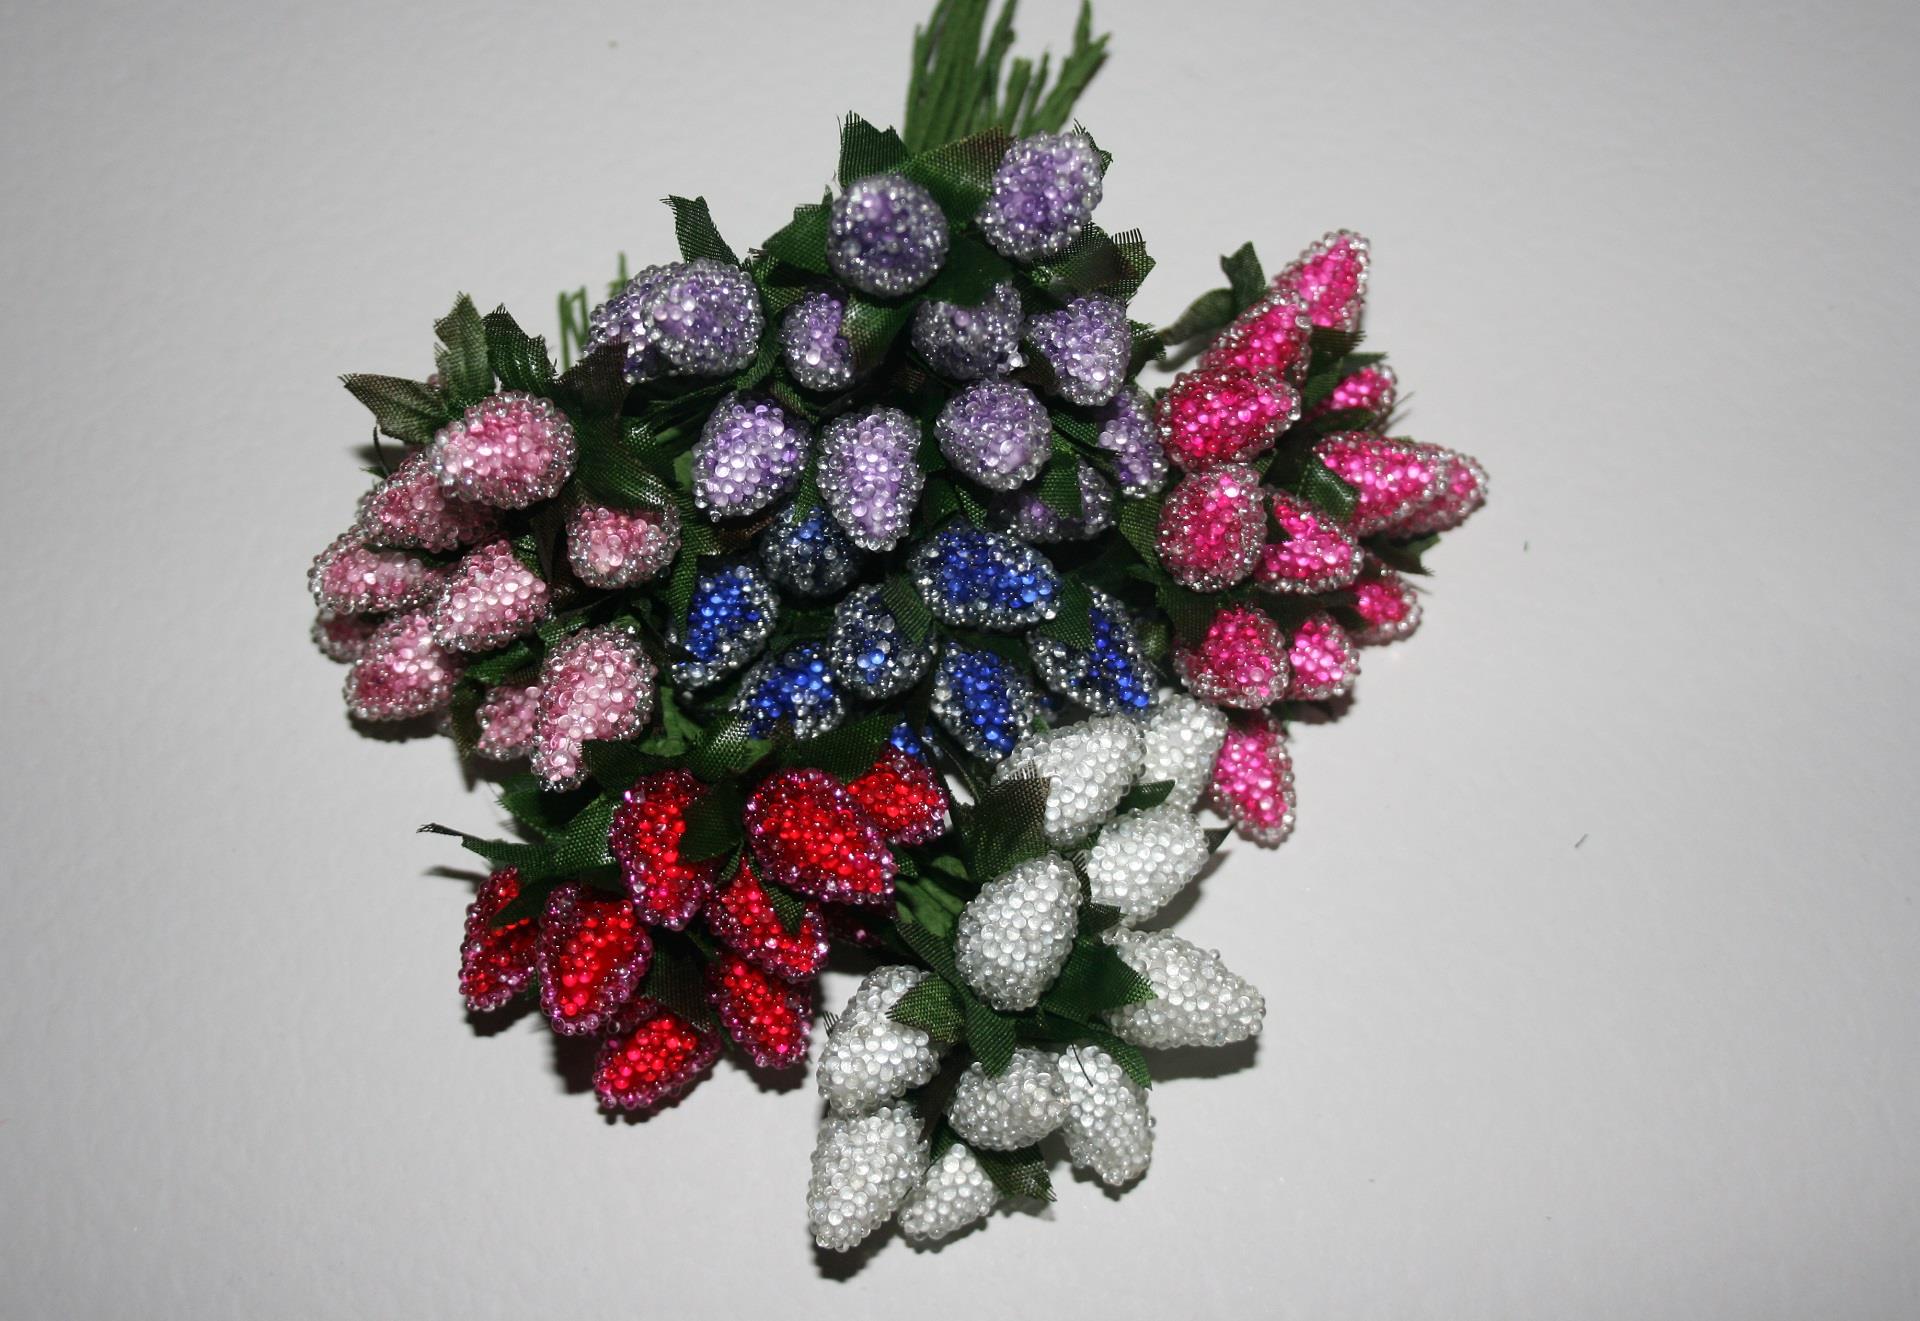 Bunch of Beaded Berries With Leaves & Stems- 5 Colour Choices - Picture 1 of 1